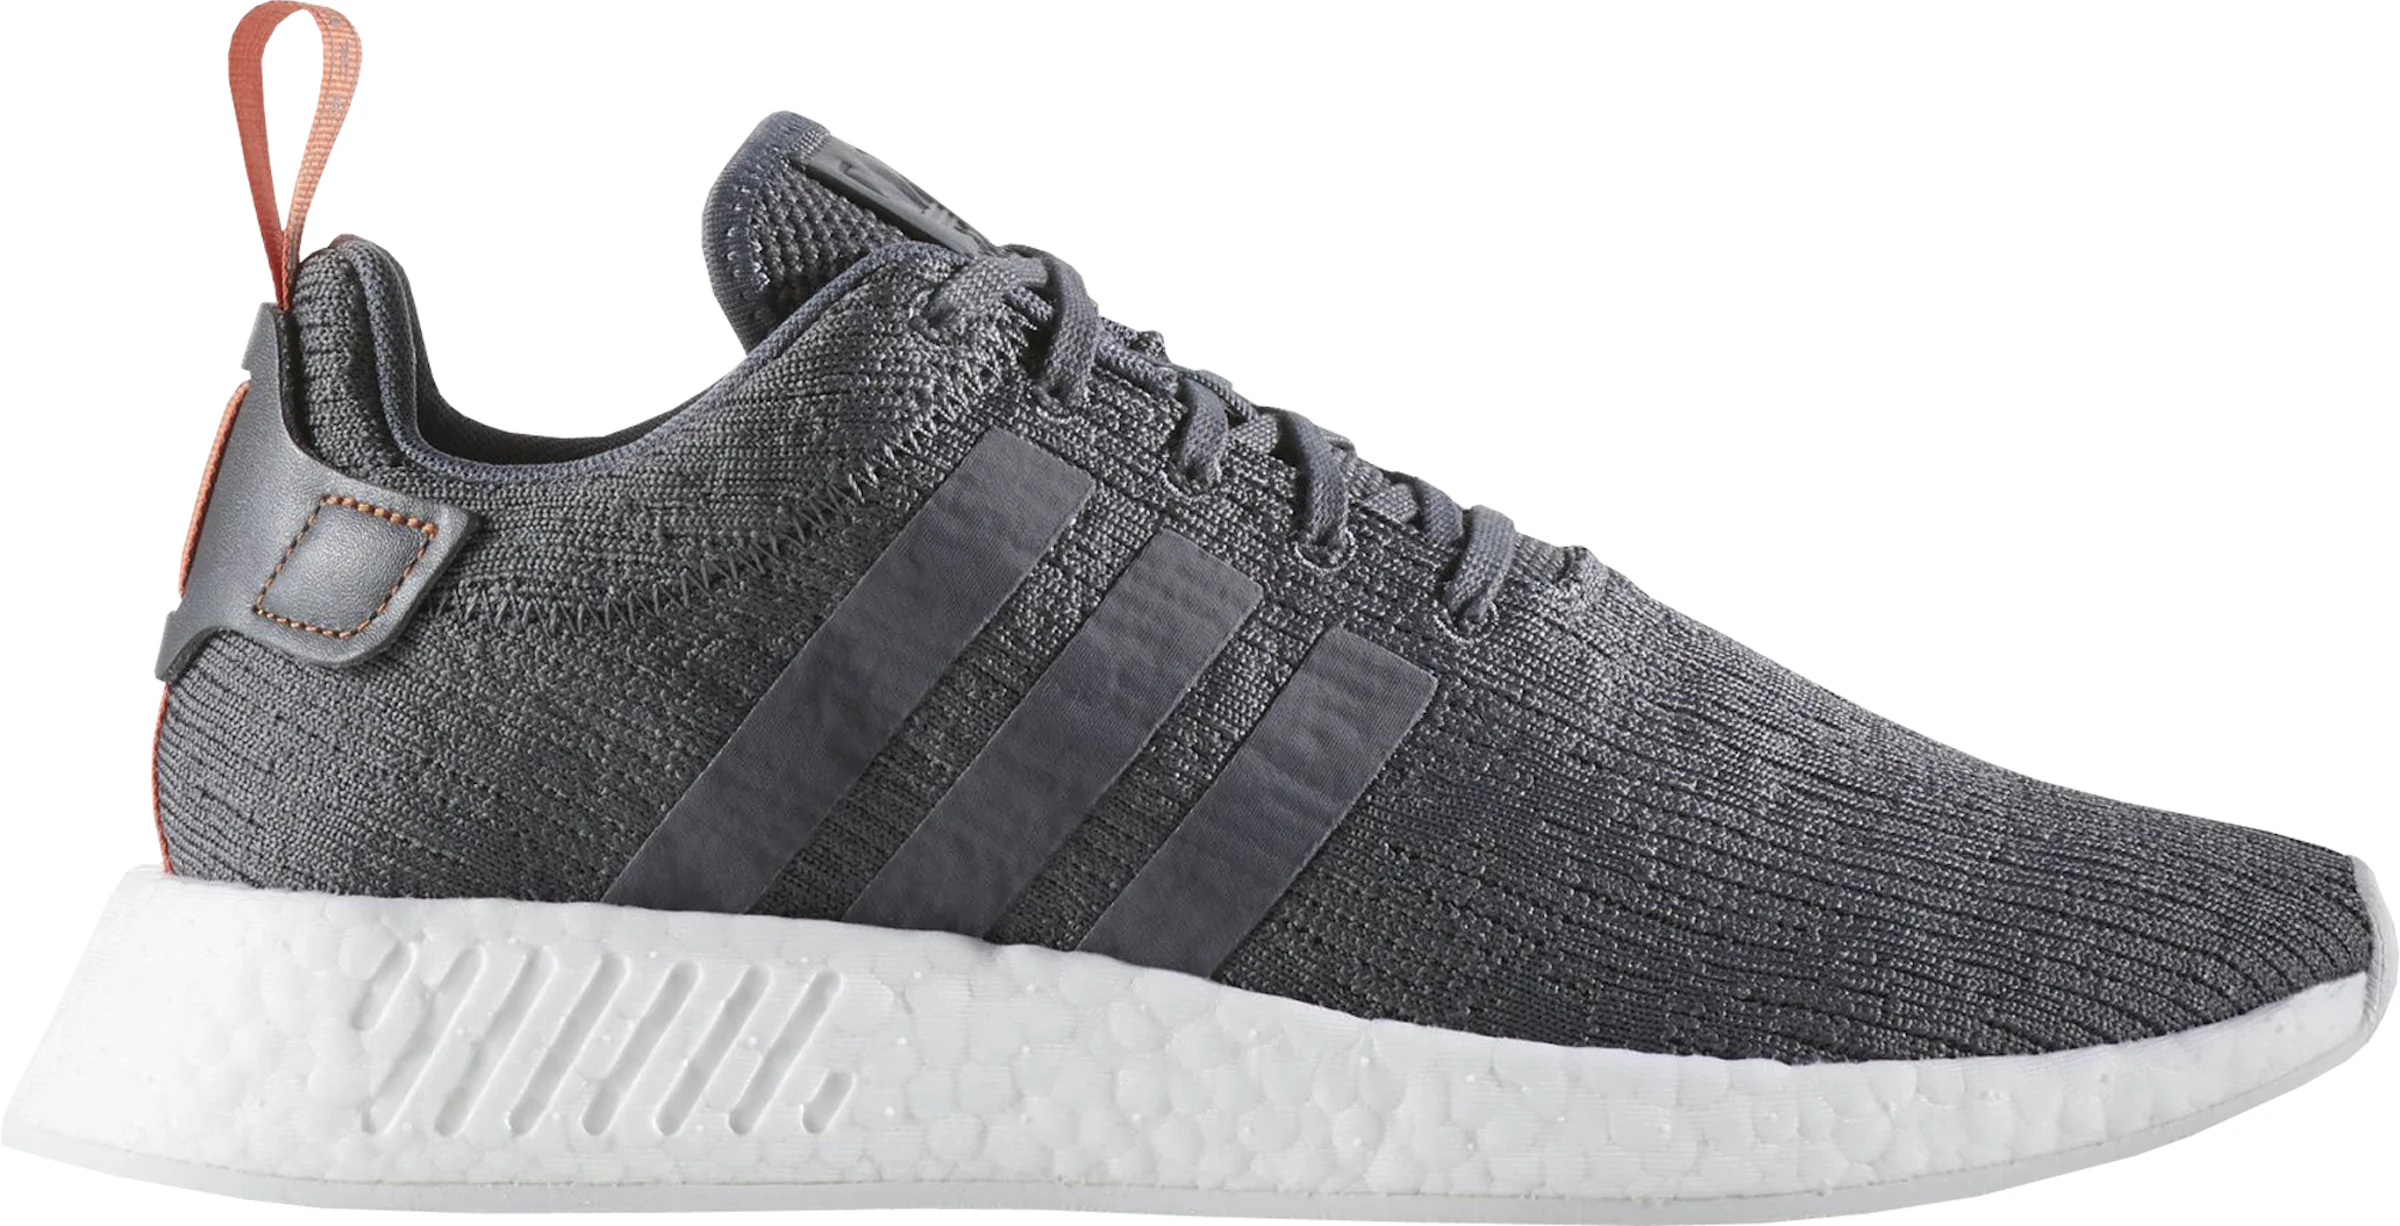 Adidas NMD R2 Reviewed for Performance and Quality